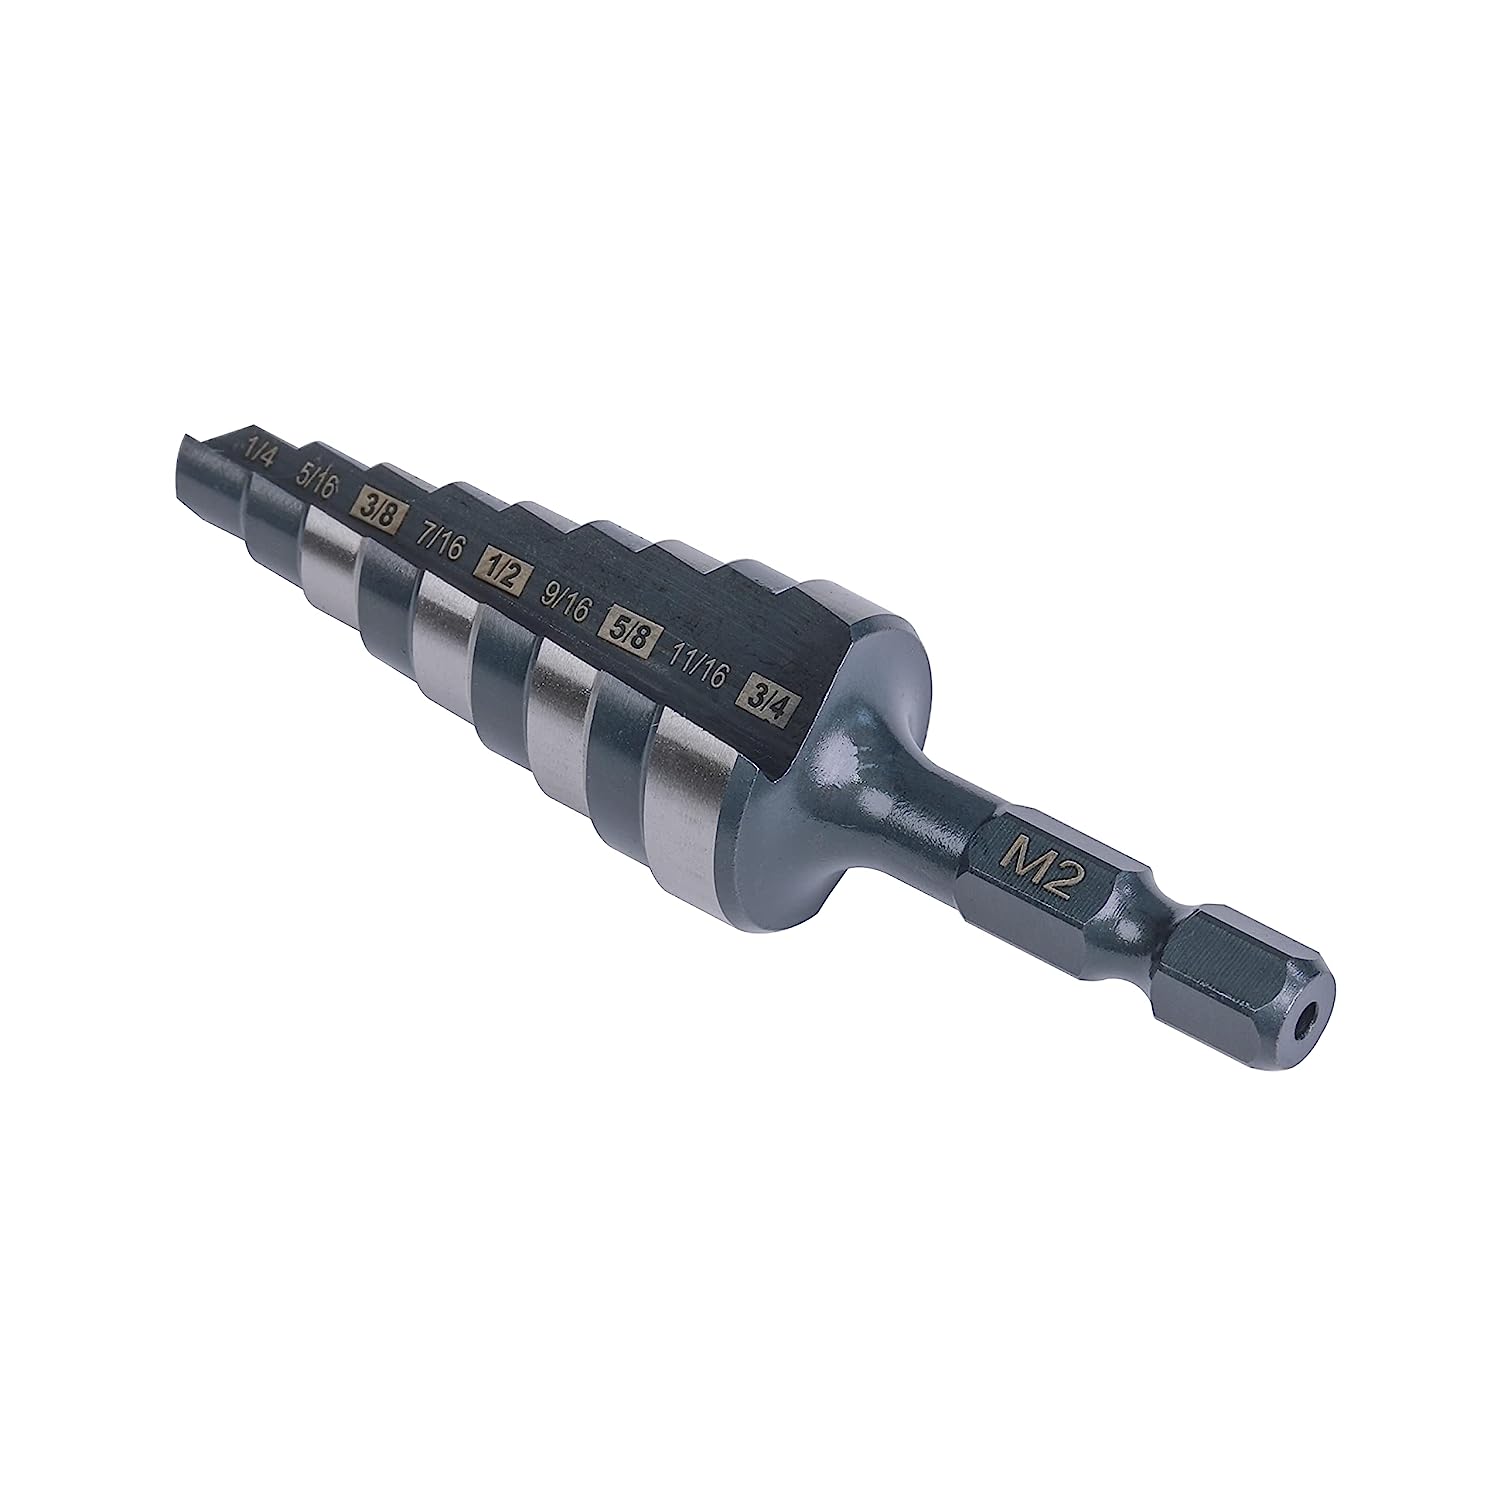 Jerax tools Quick Change Step Drill Bit Double Fluted [...]